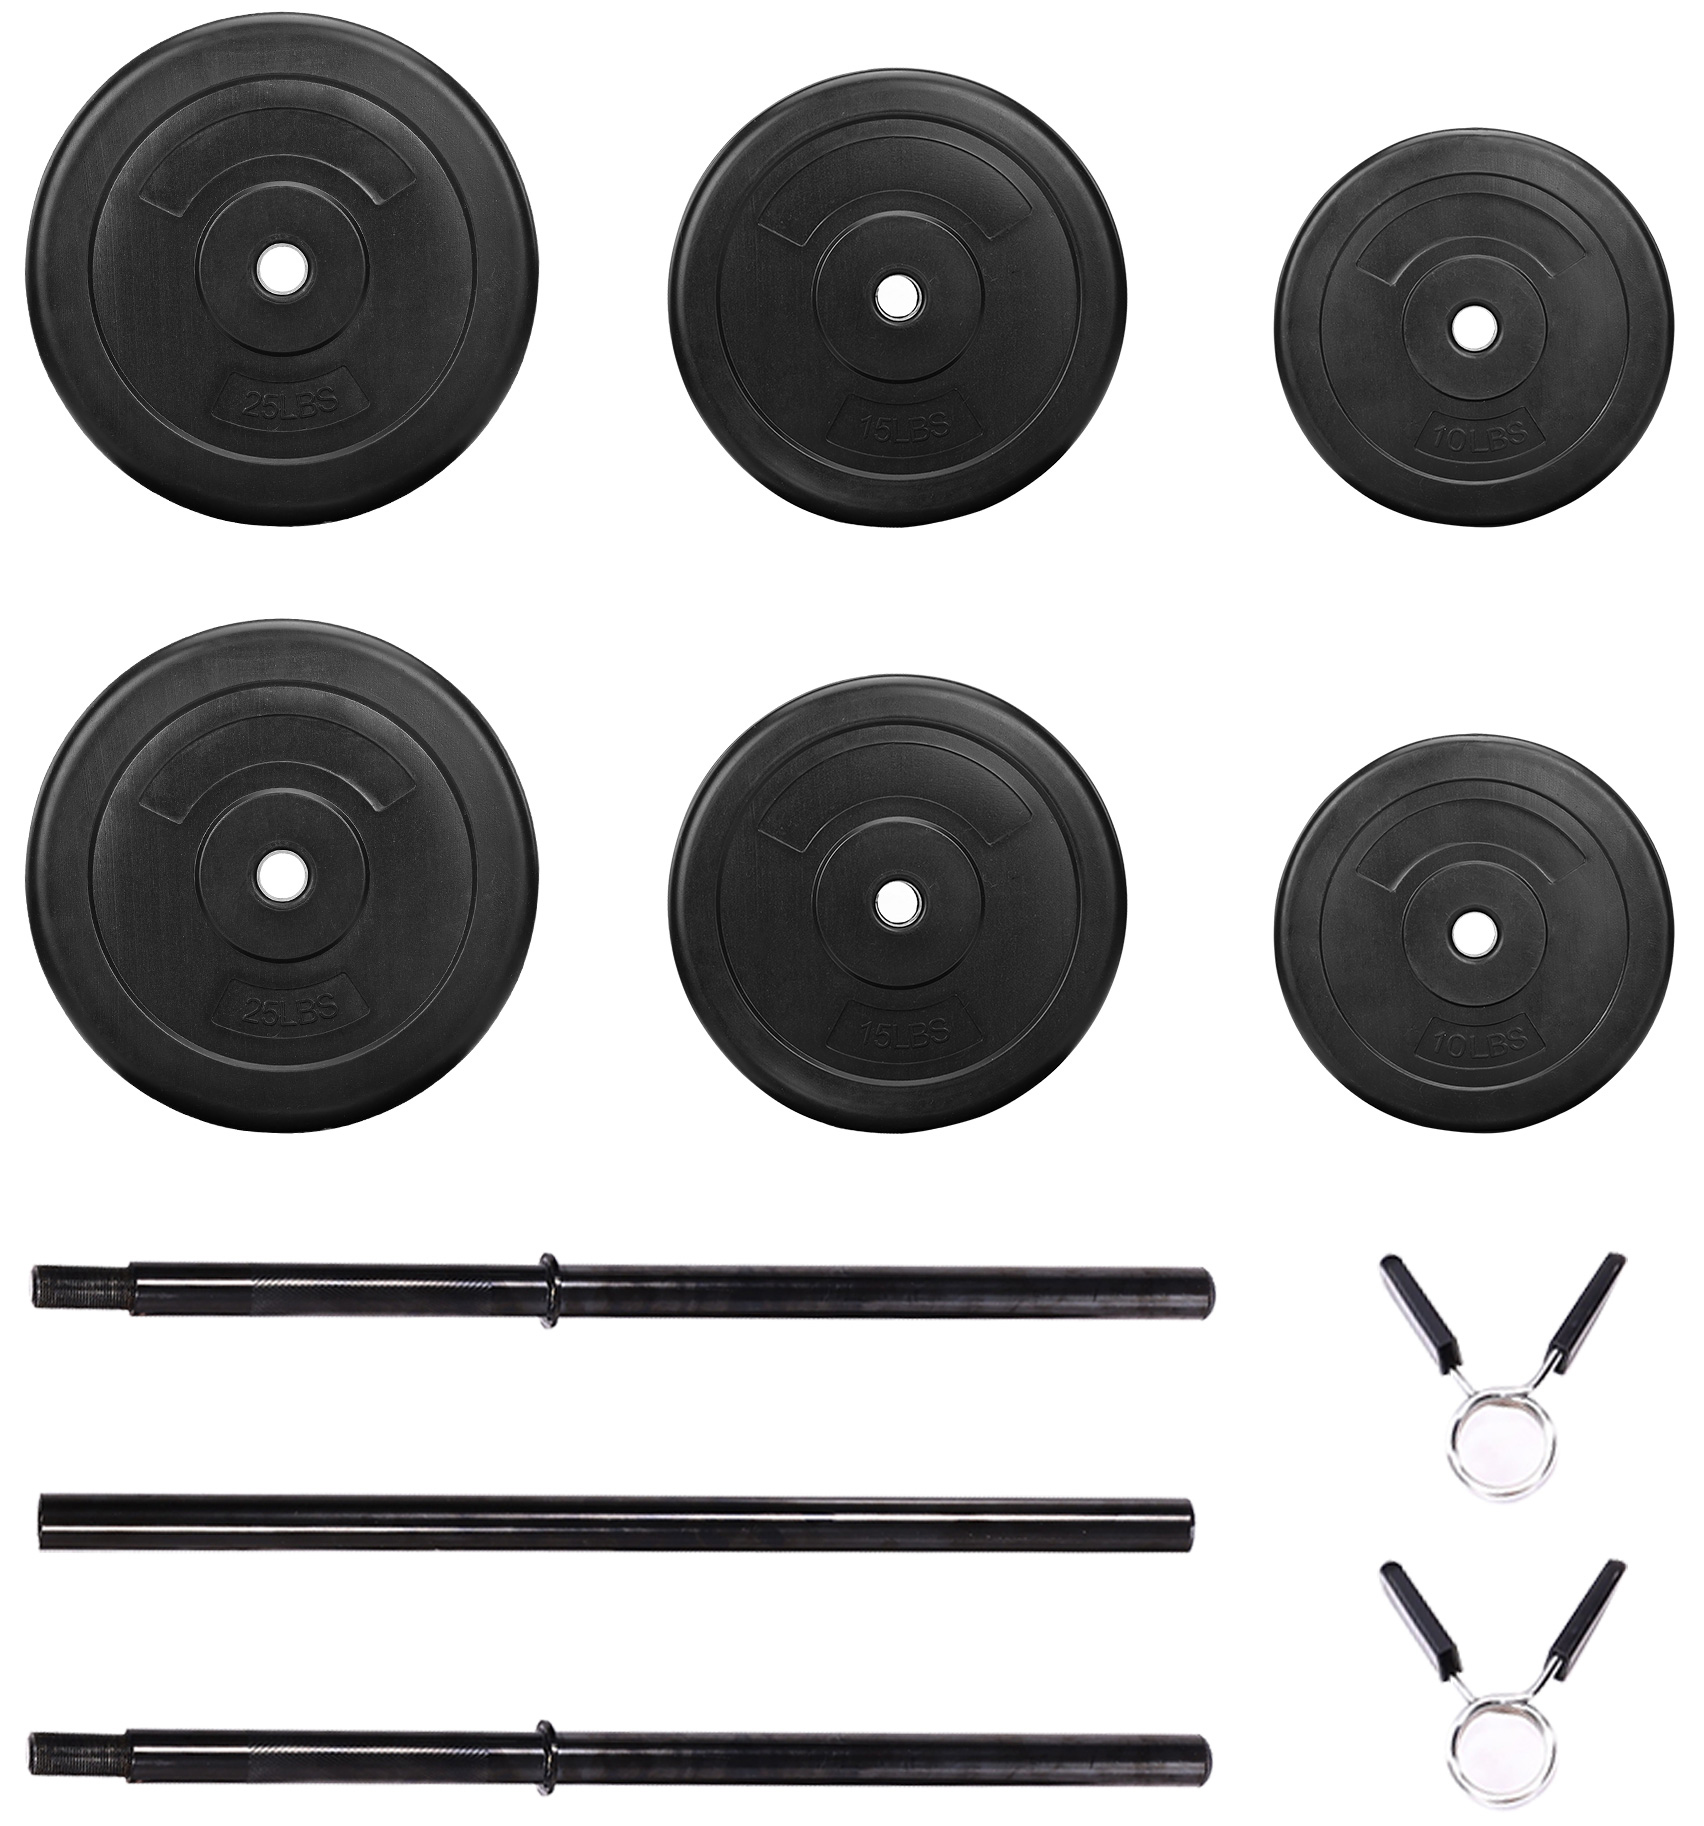 BalanceFrom Vinyl Standard Weight Set in Black, 100 lbs. - image 3 of 5